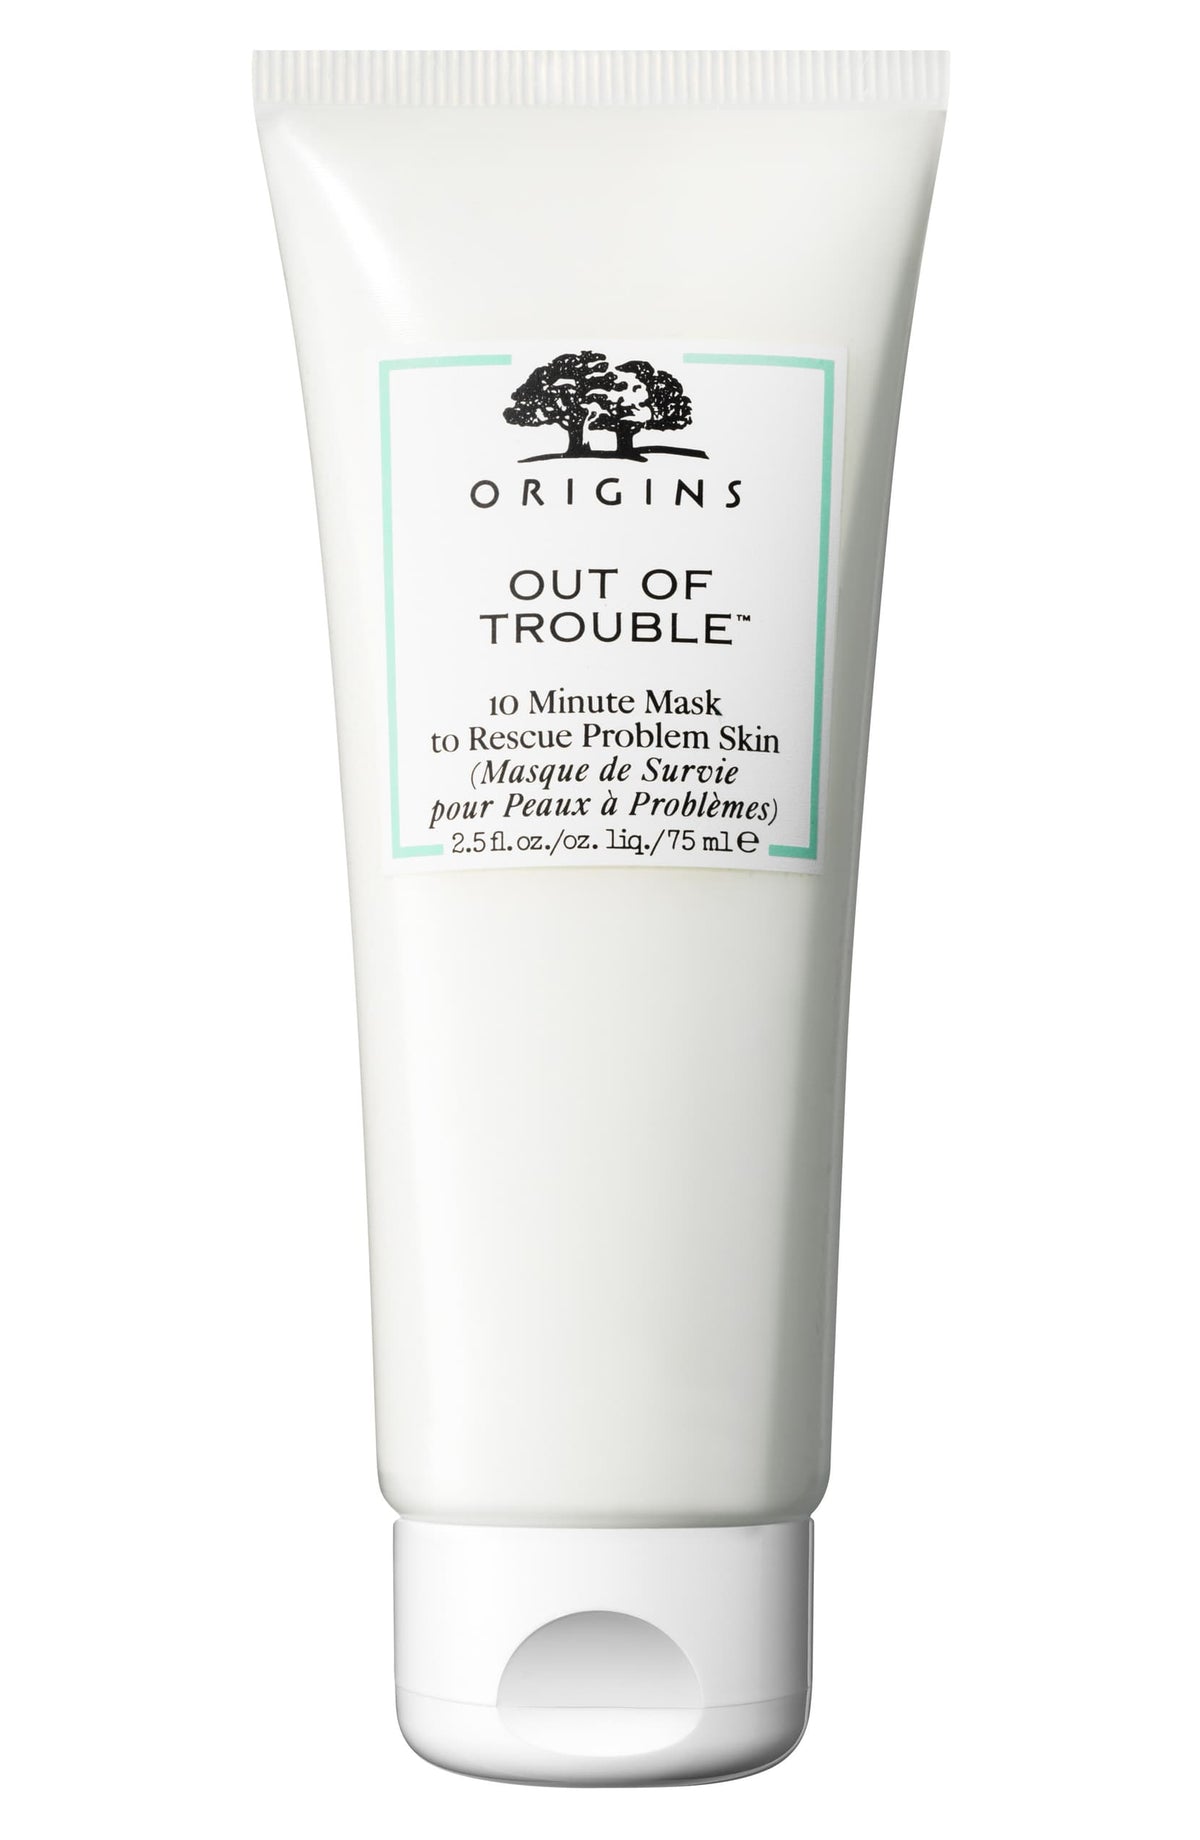 Origins Out of Trouble 10 Minute Mask to Rescue Problem Skin - eCosmeticWorld